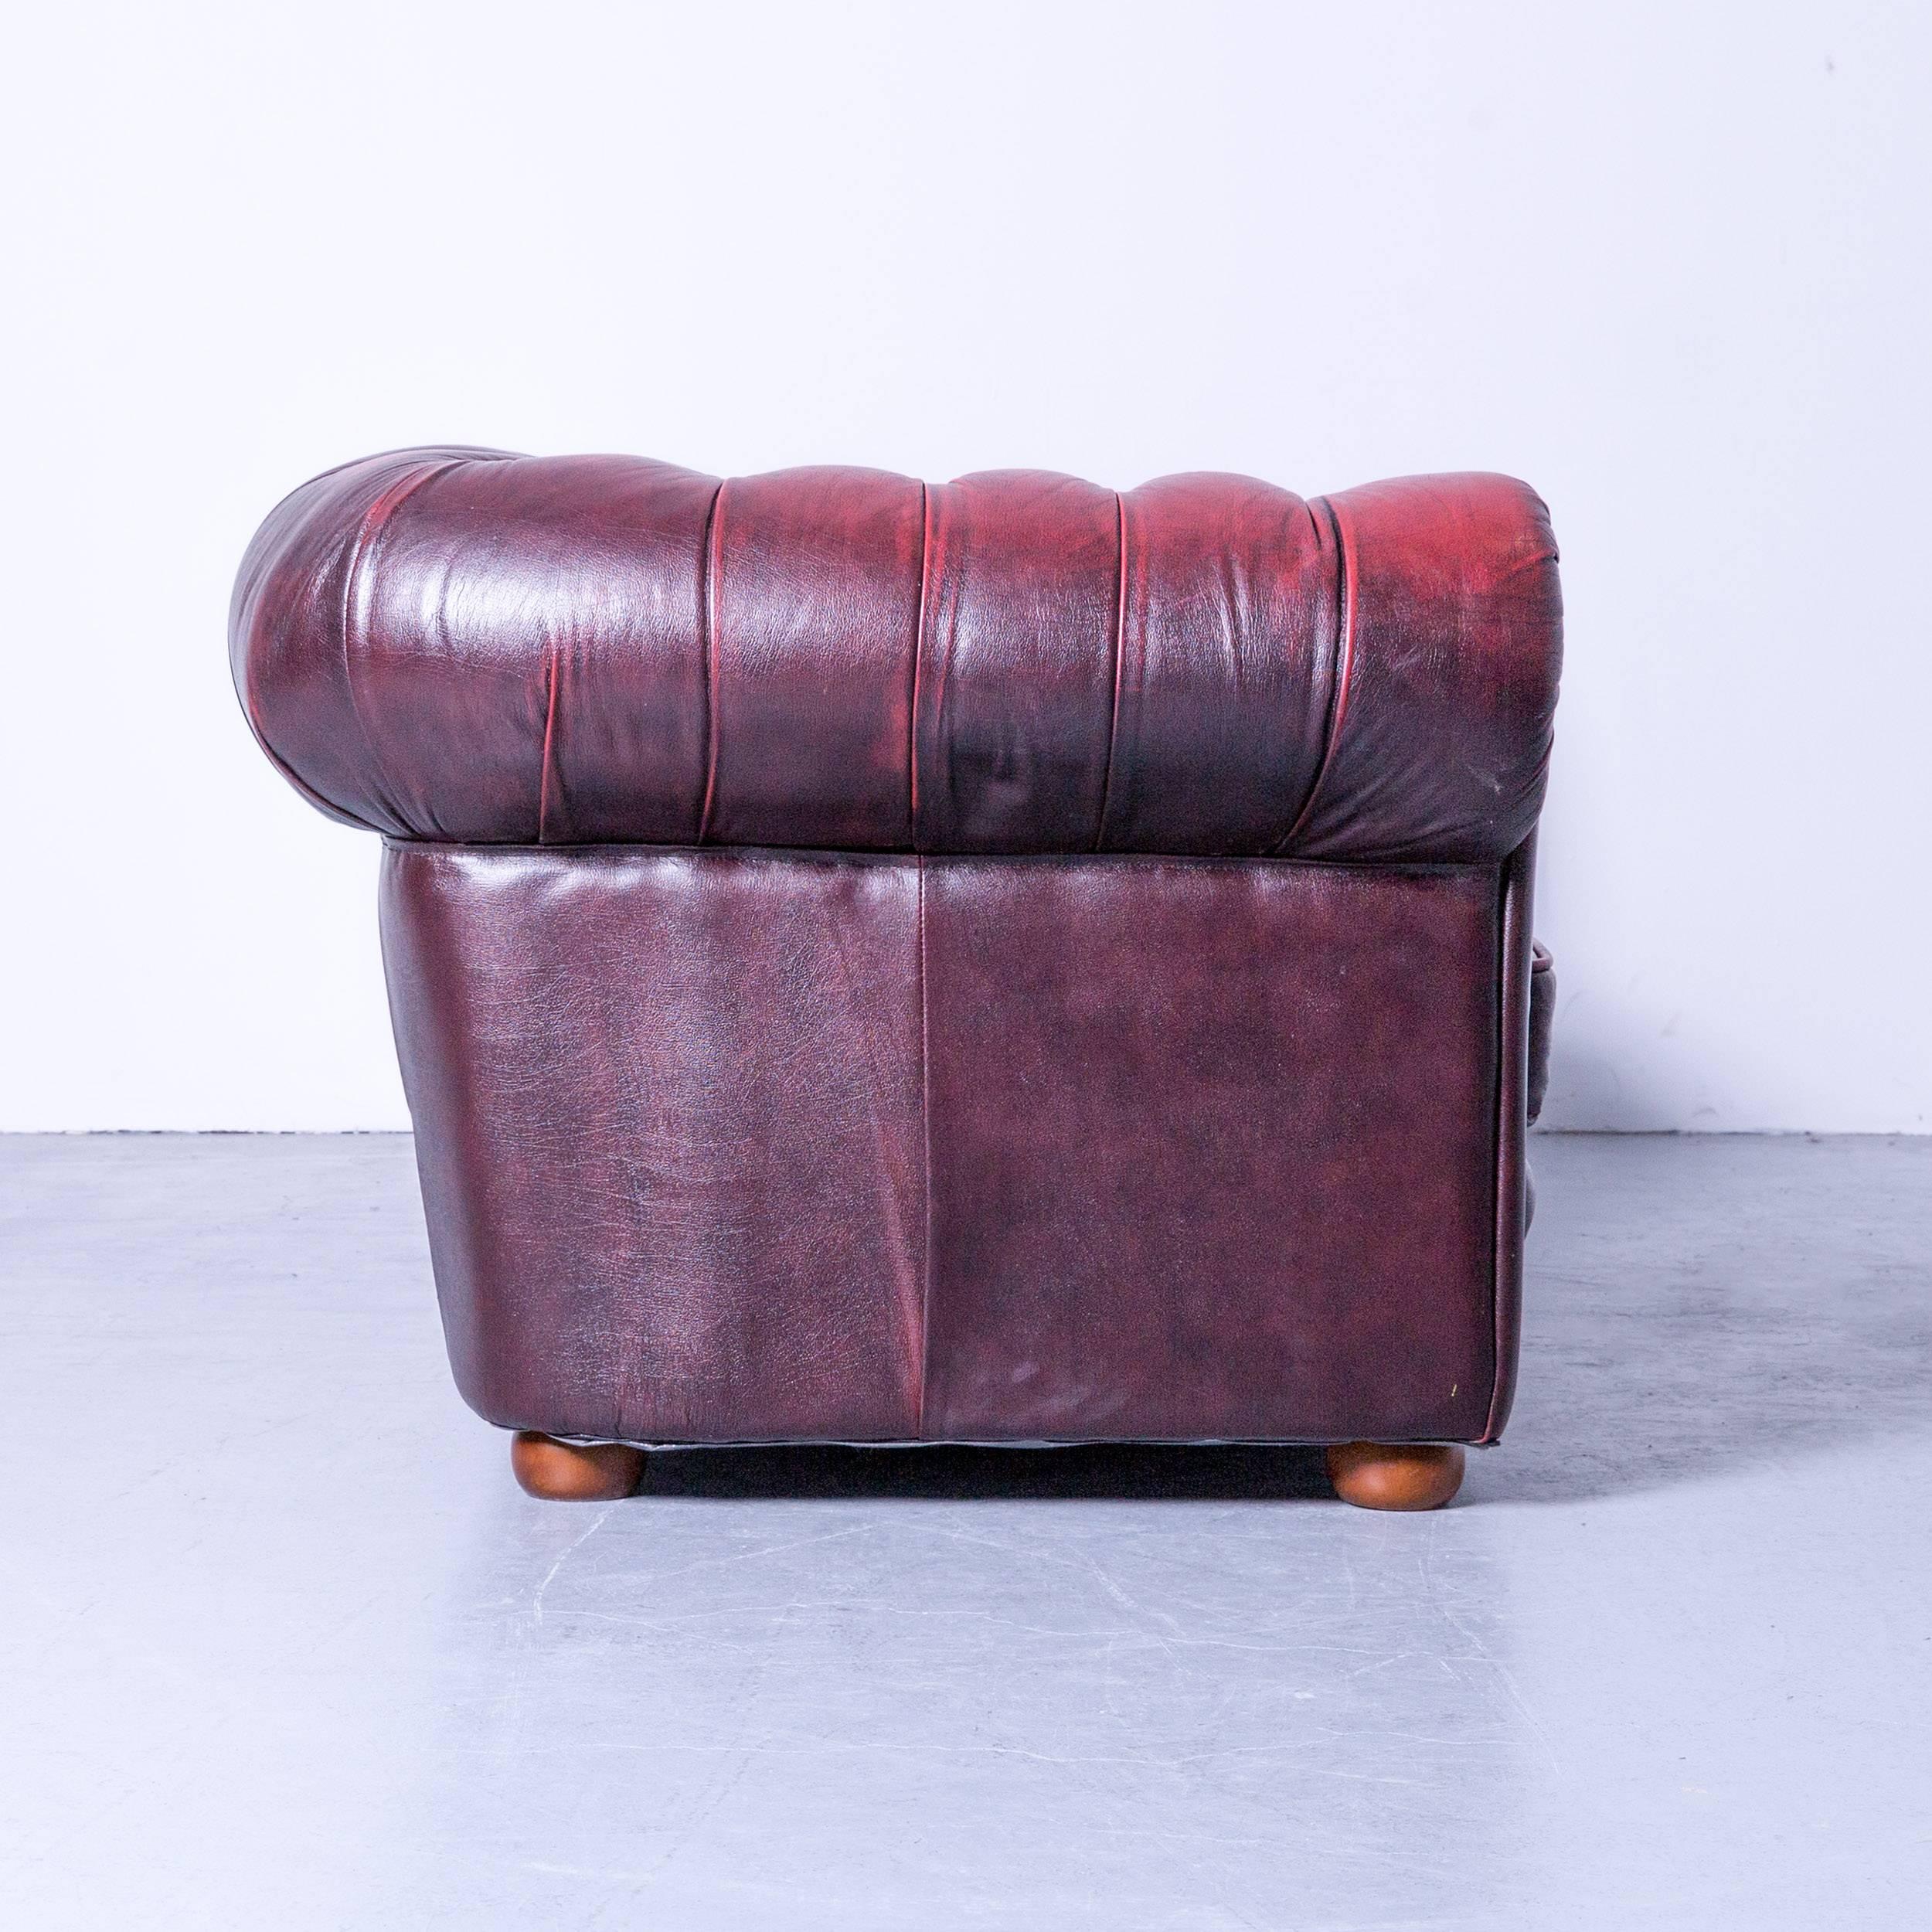 Chesterfield Three-Seat Sofa Red Leather Couch Vintage Retro Rivets 1